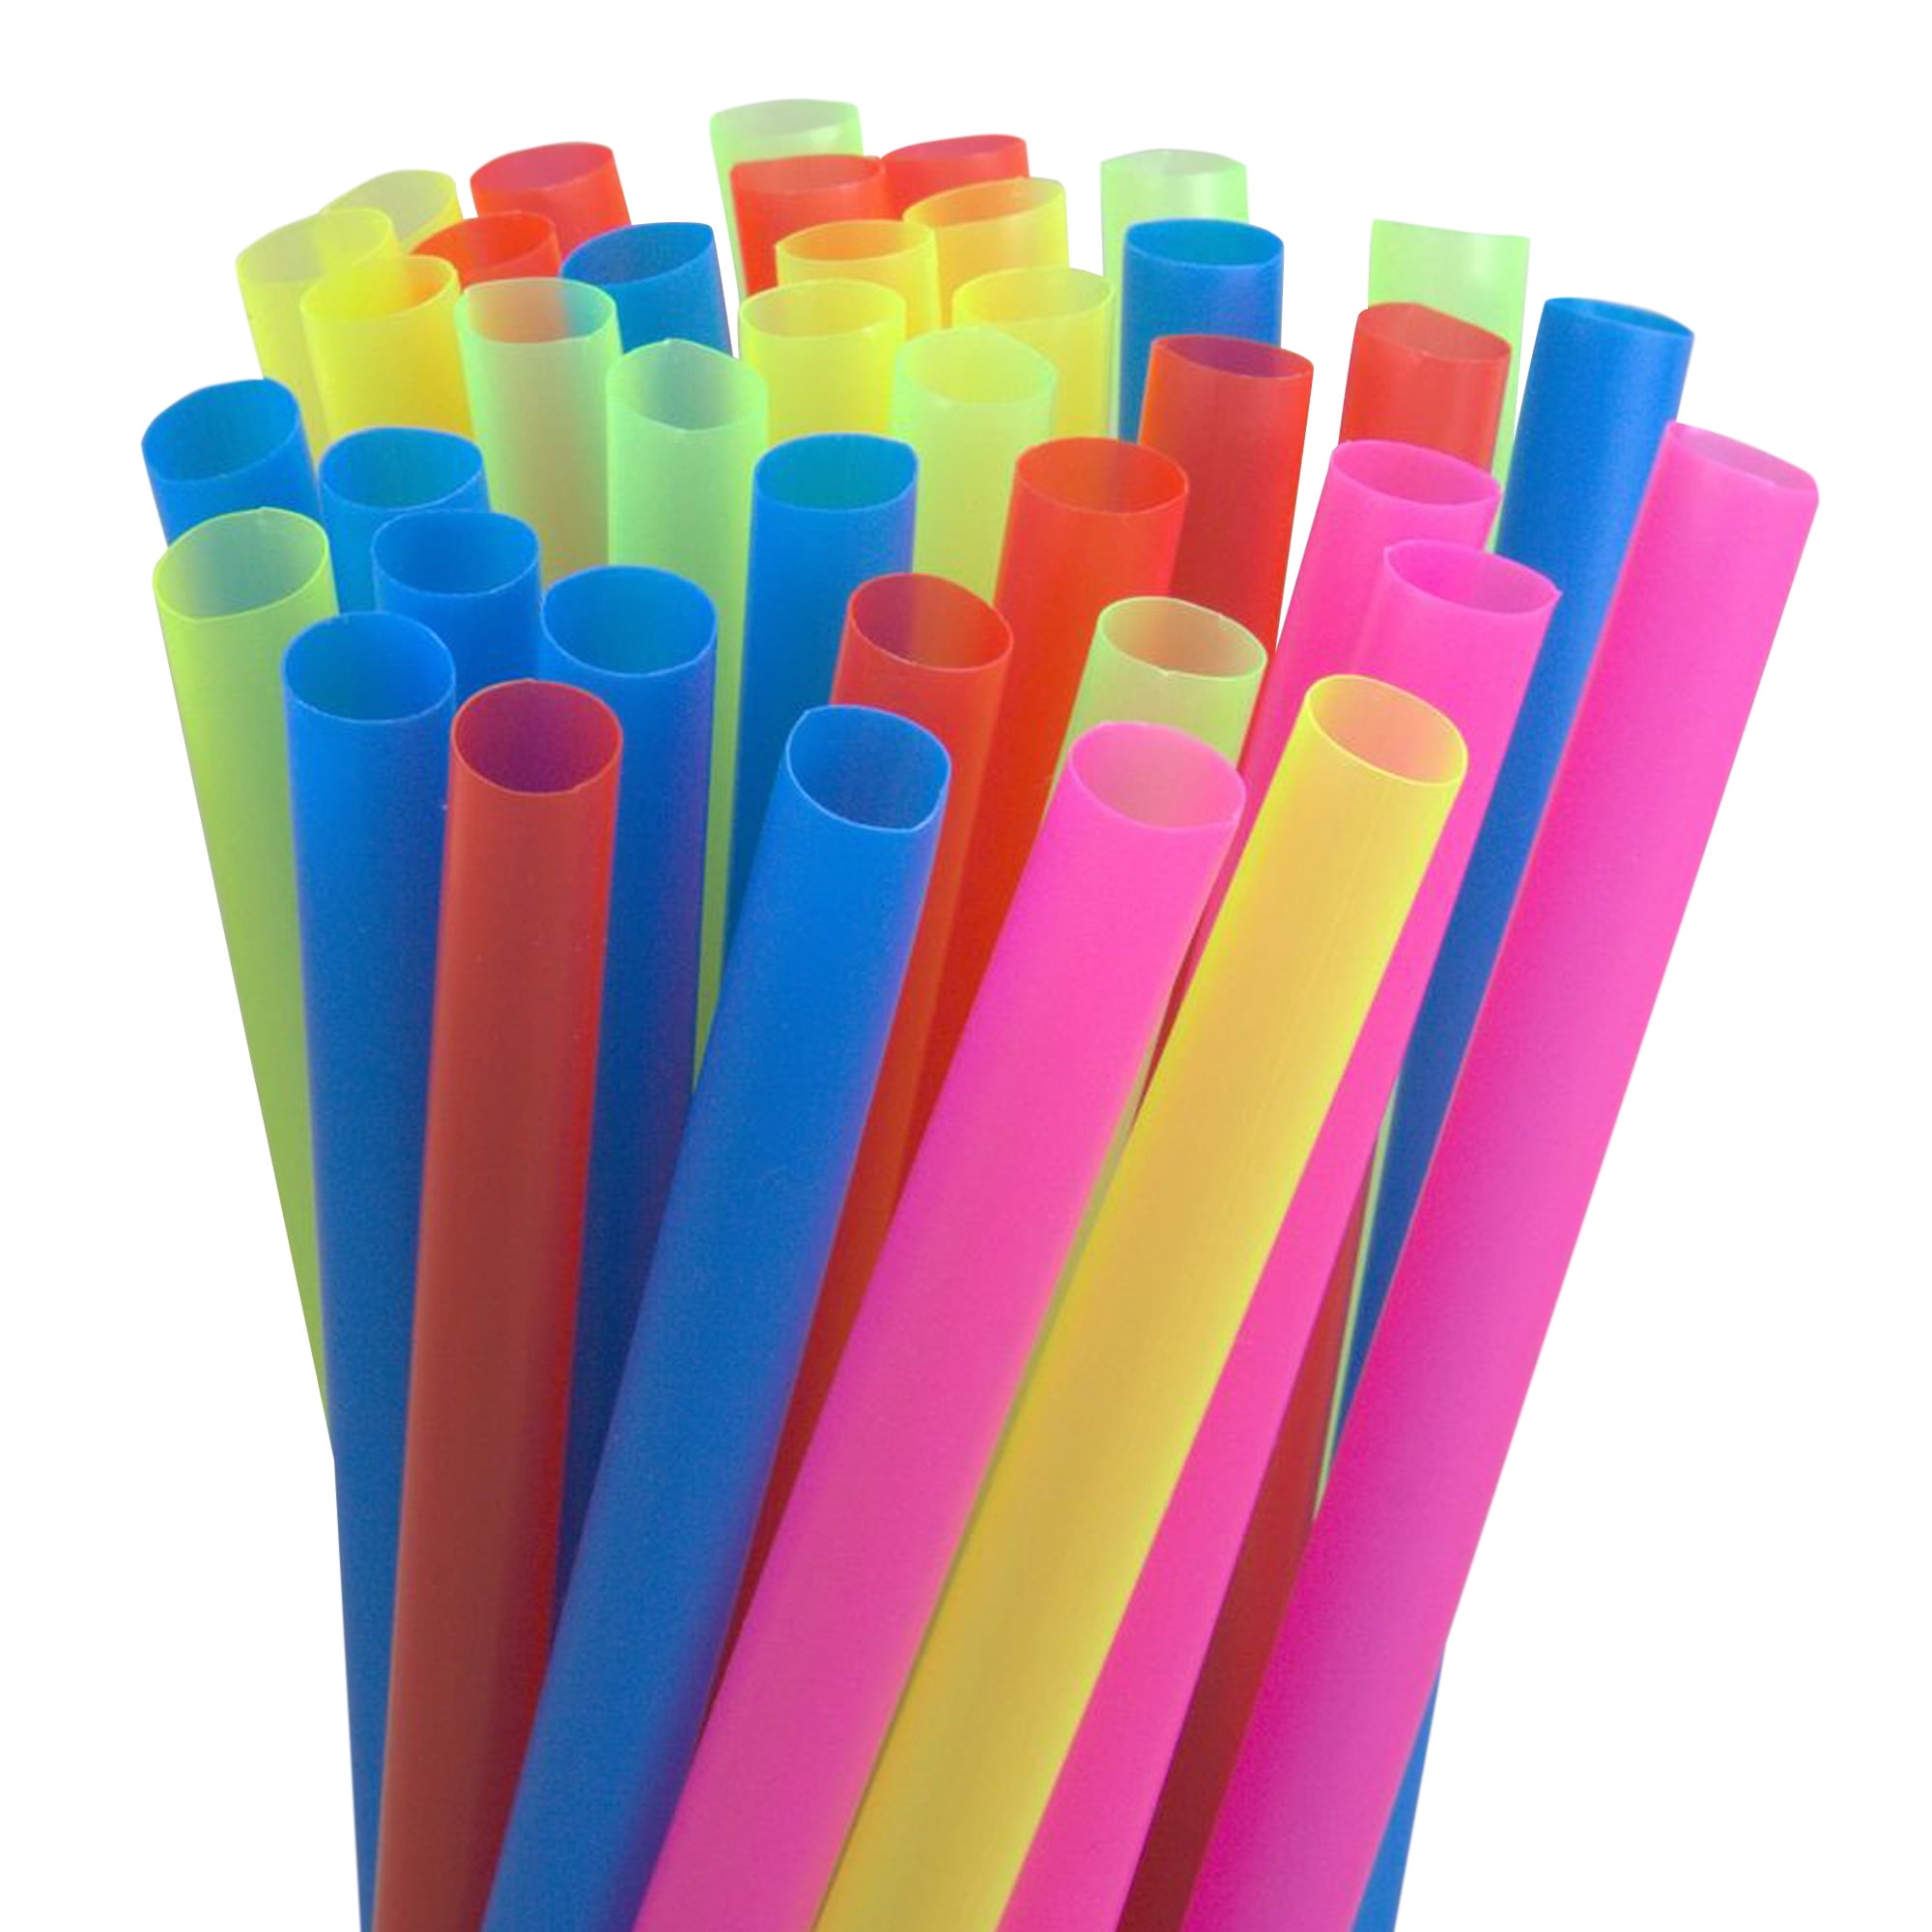 approx 300 ct Boba Bubble Tea Straws Individually Wrapped 9" x 0.5" 